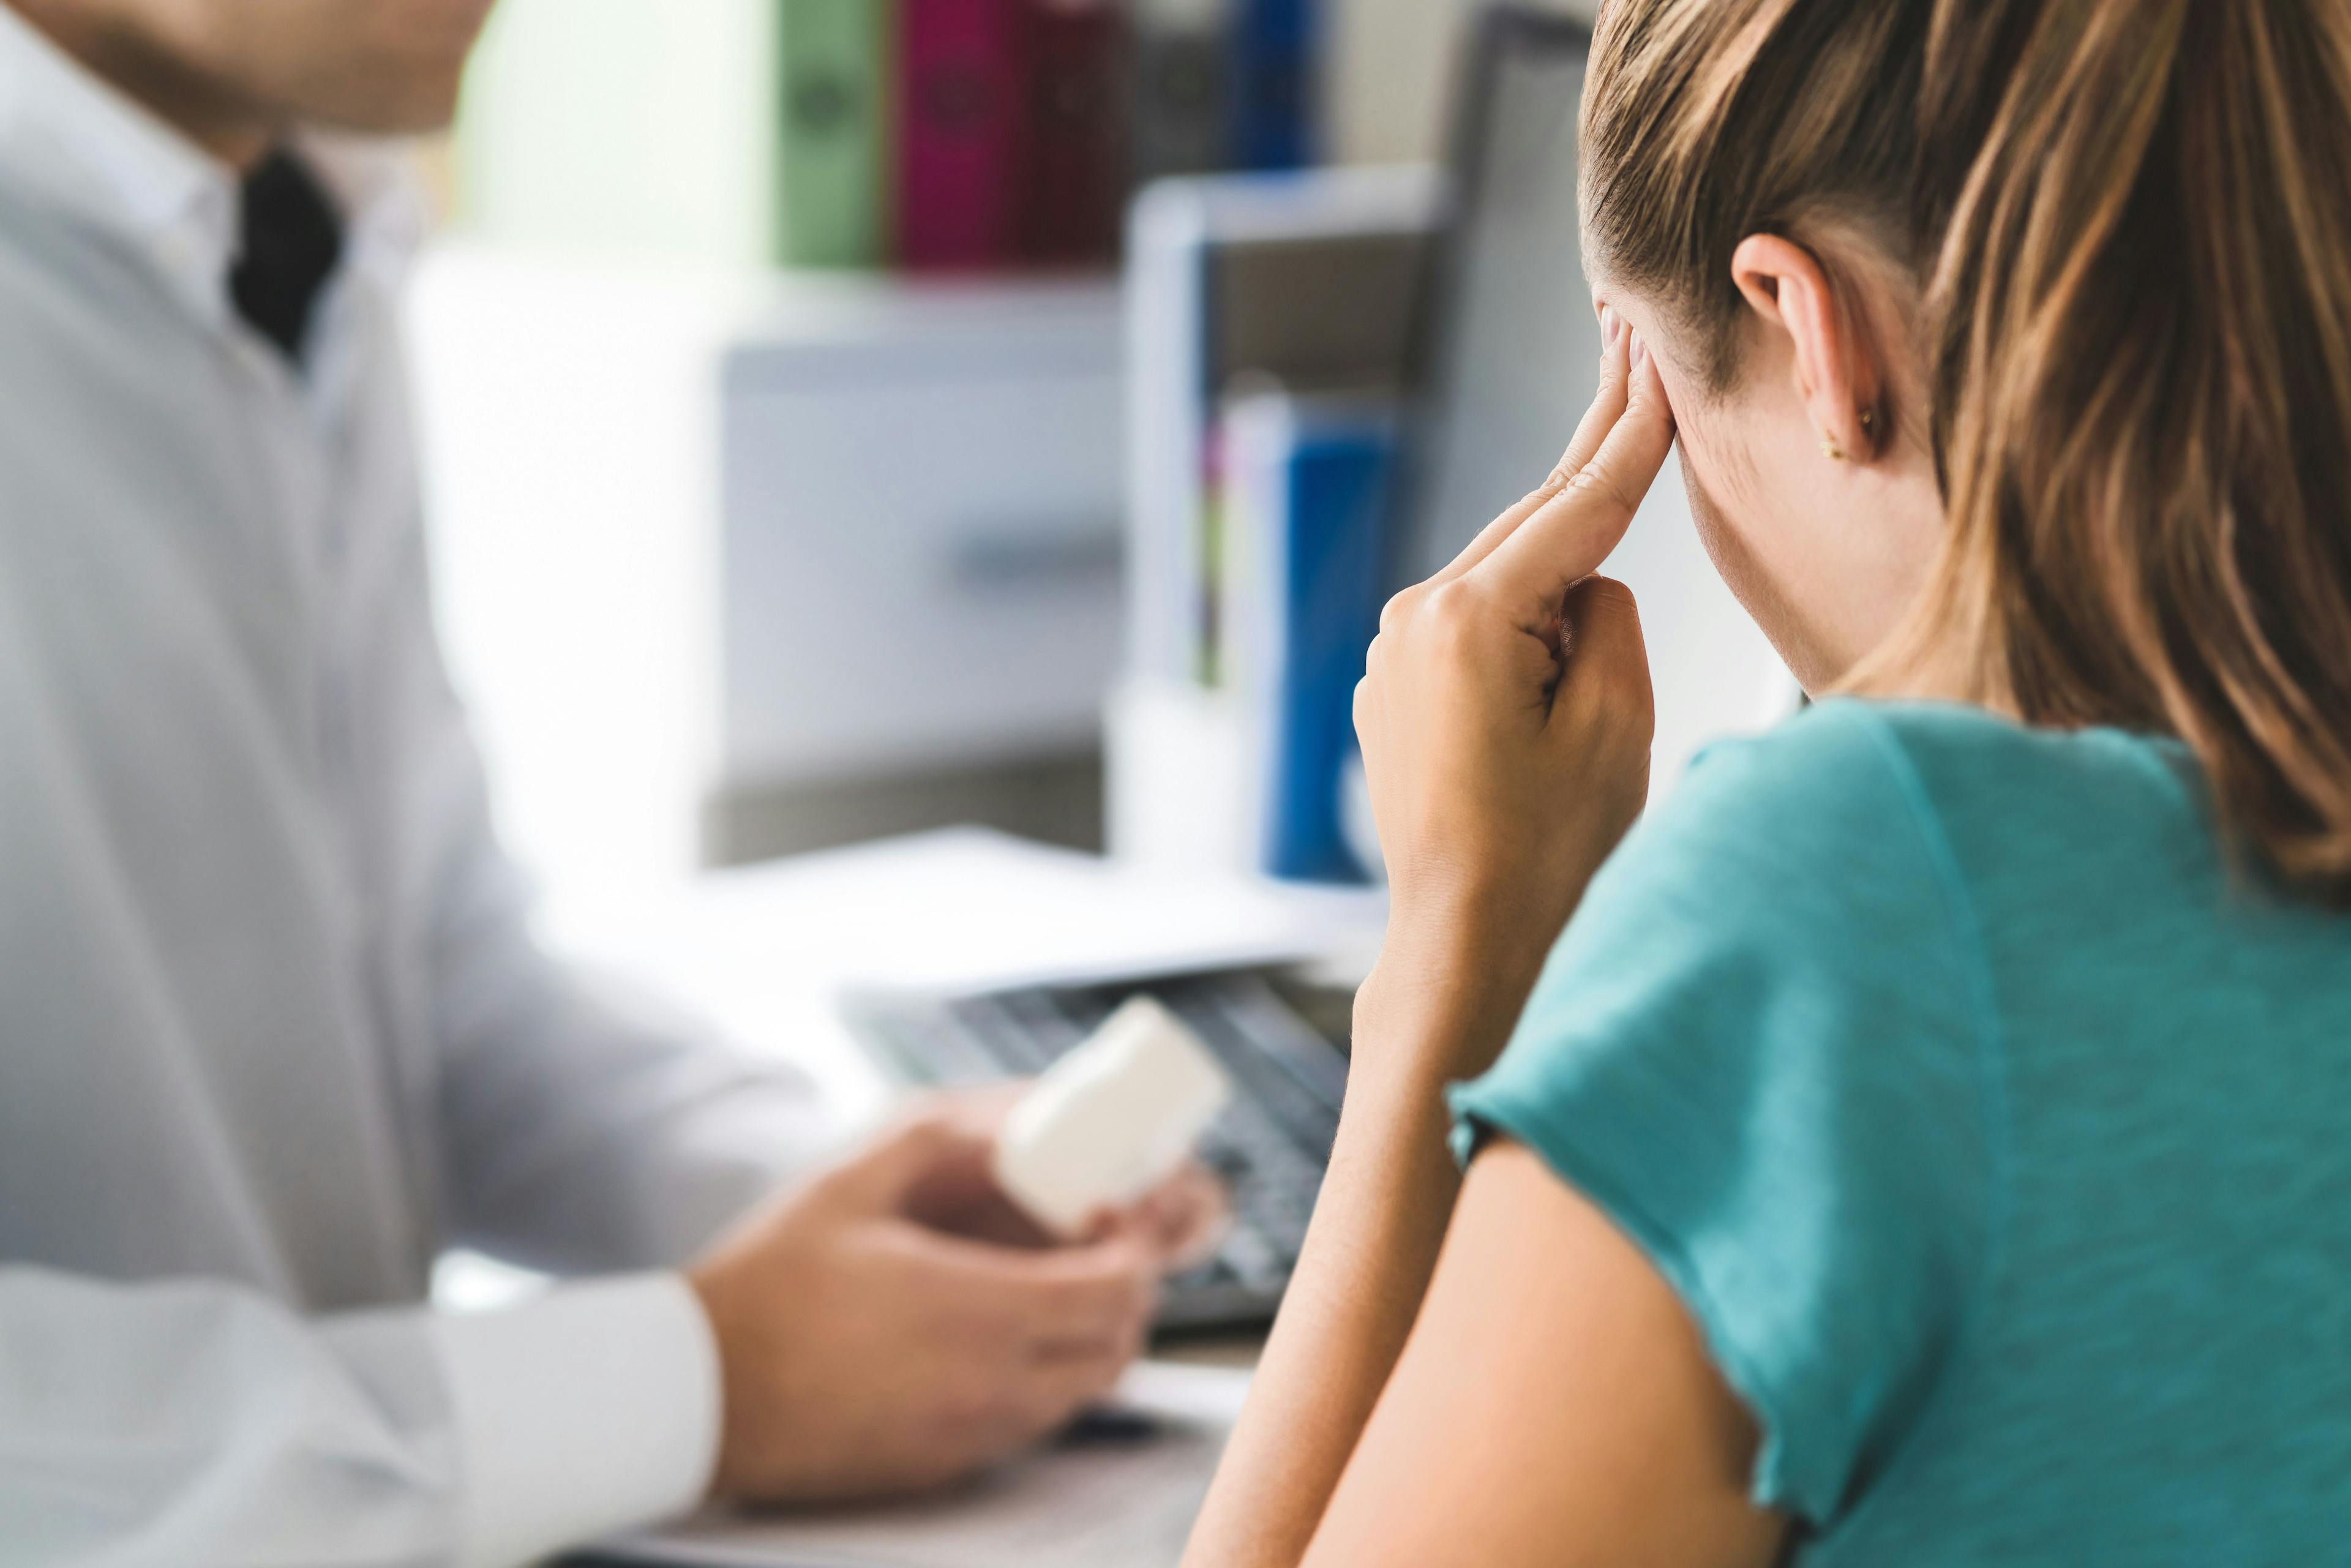 Survey results addressed connections between migraine and mental health, stigma, and treatment preferences.